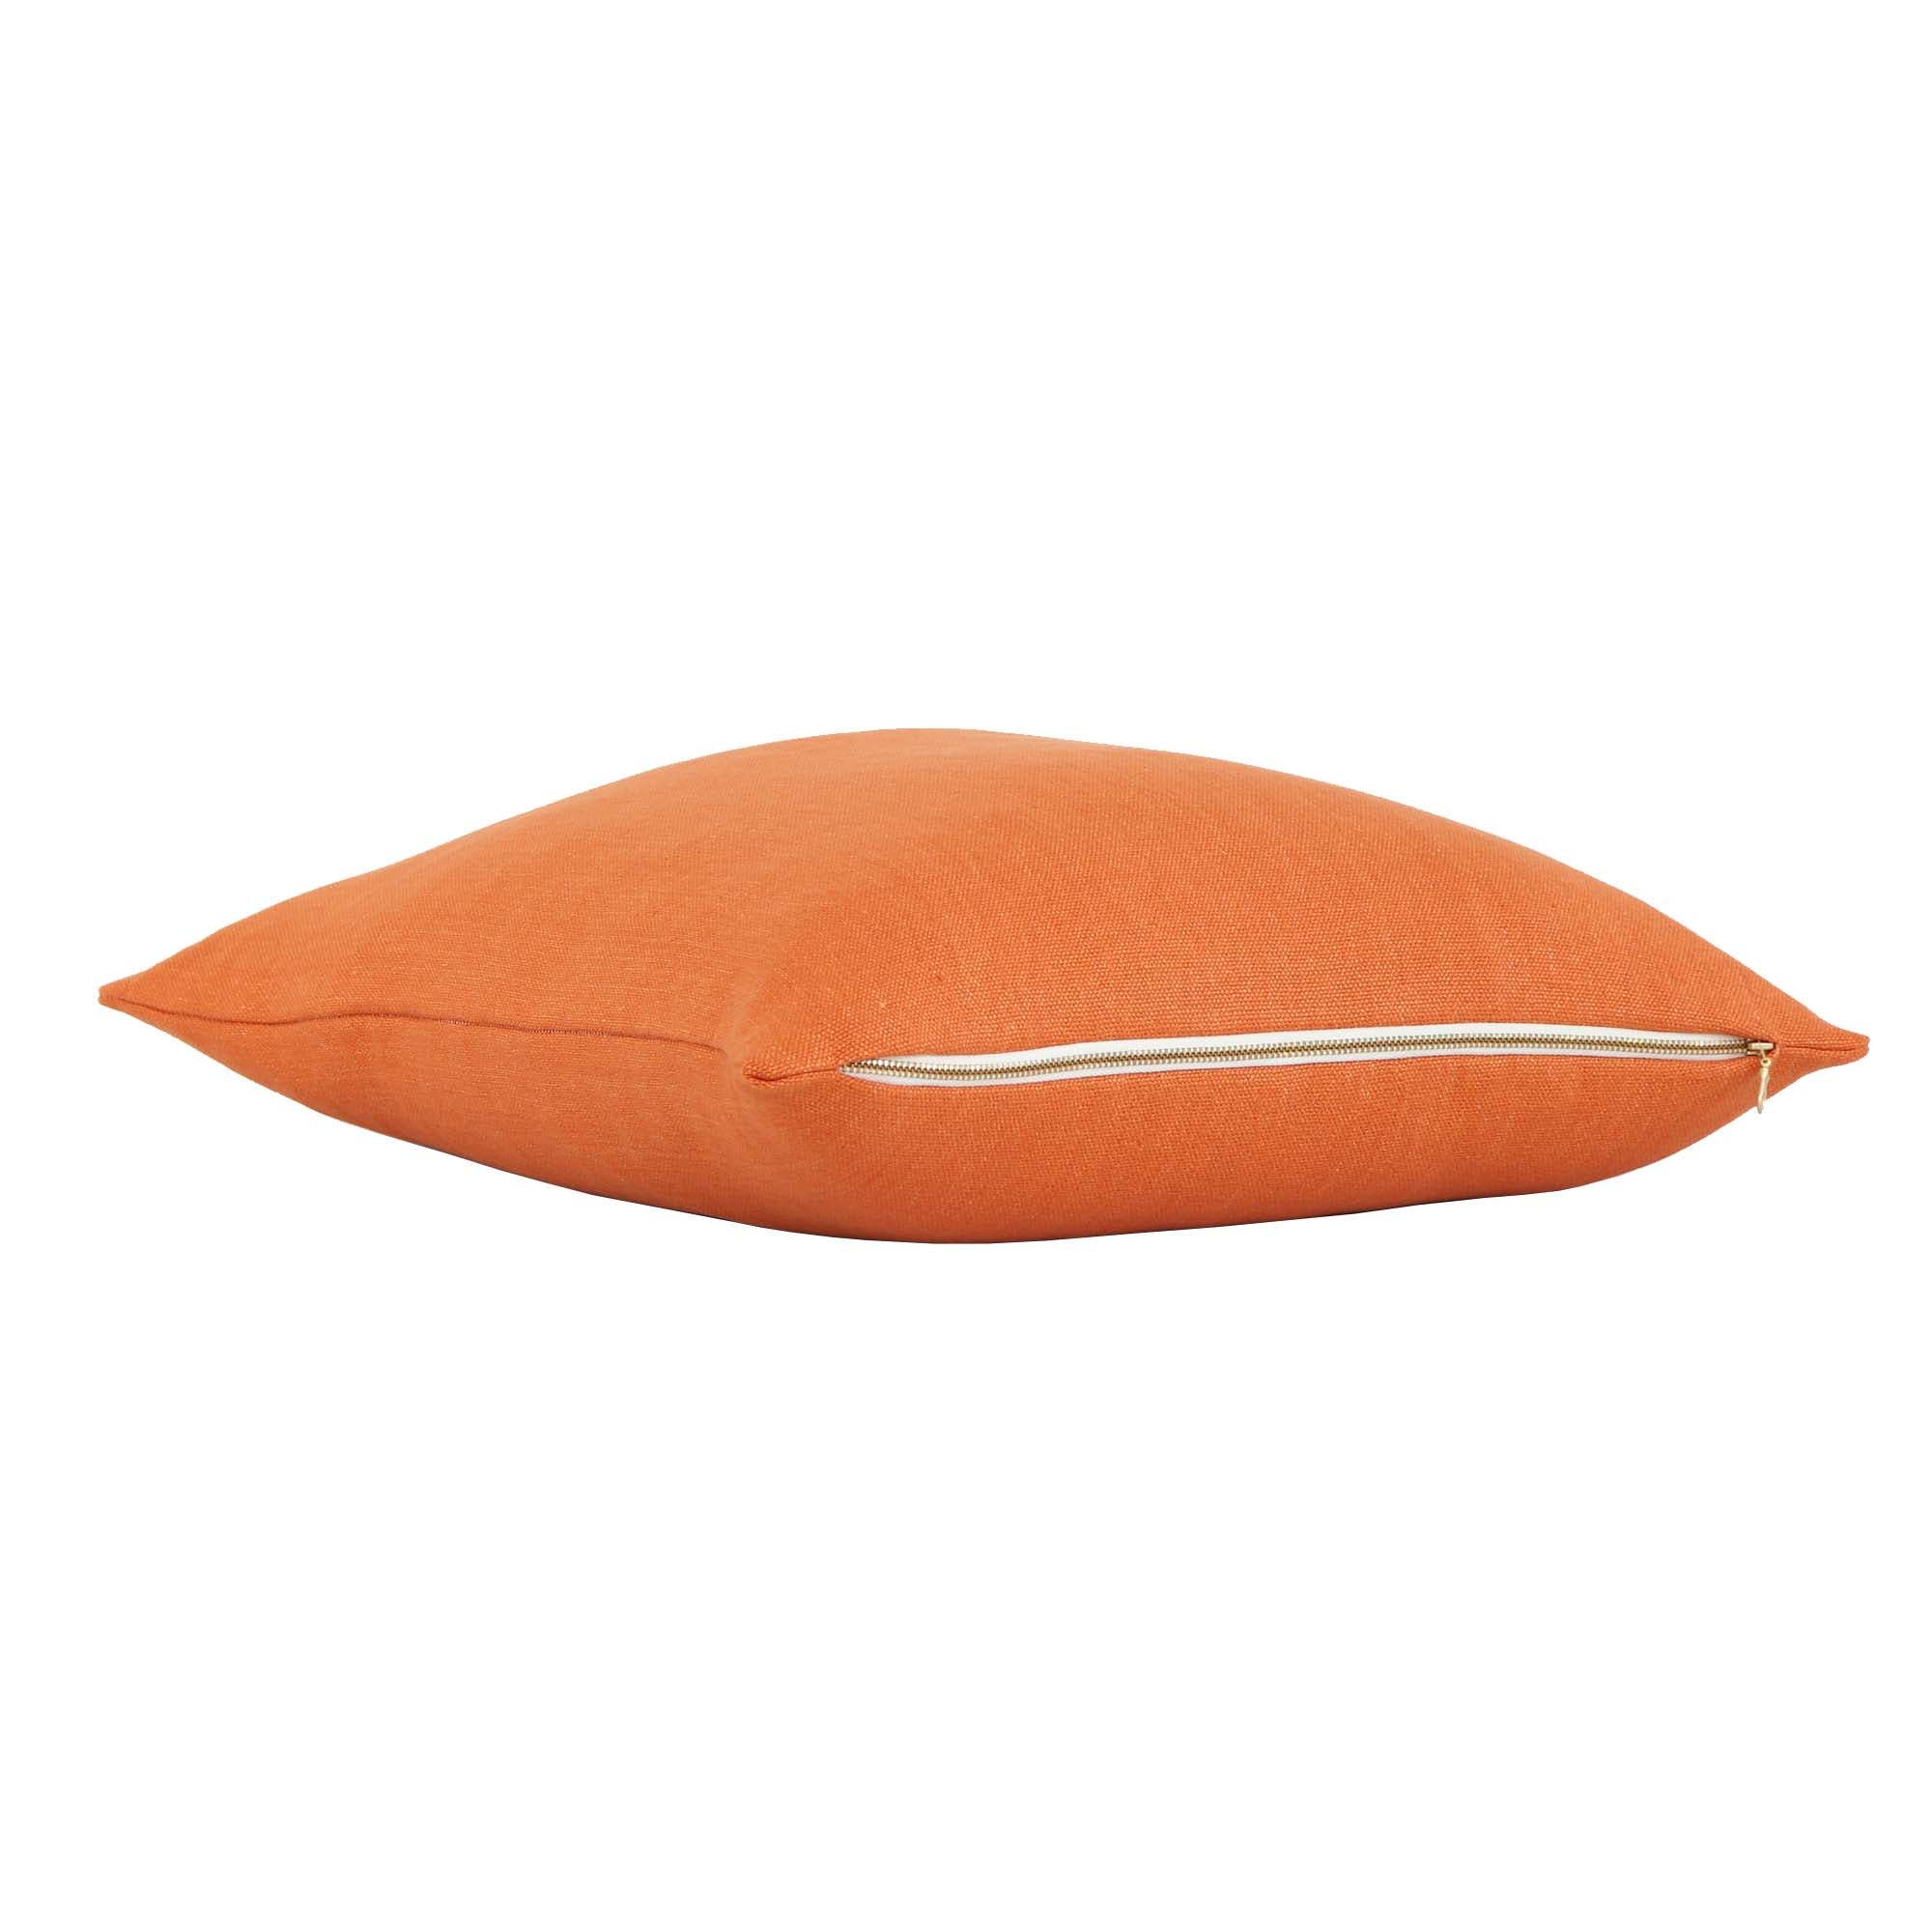 Tay Pumpkin Orange Solid Linen Decorative Throw Pillow Cover with Exposed Brass Zipper